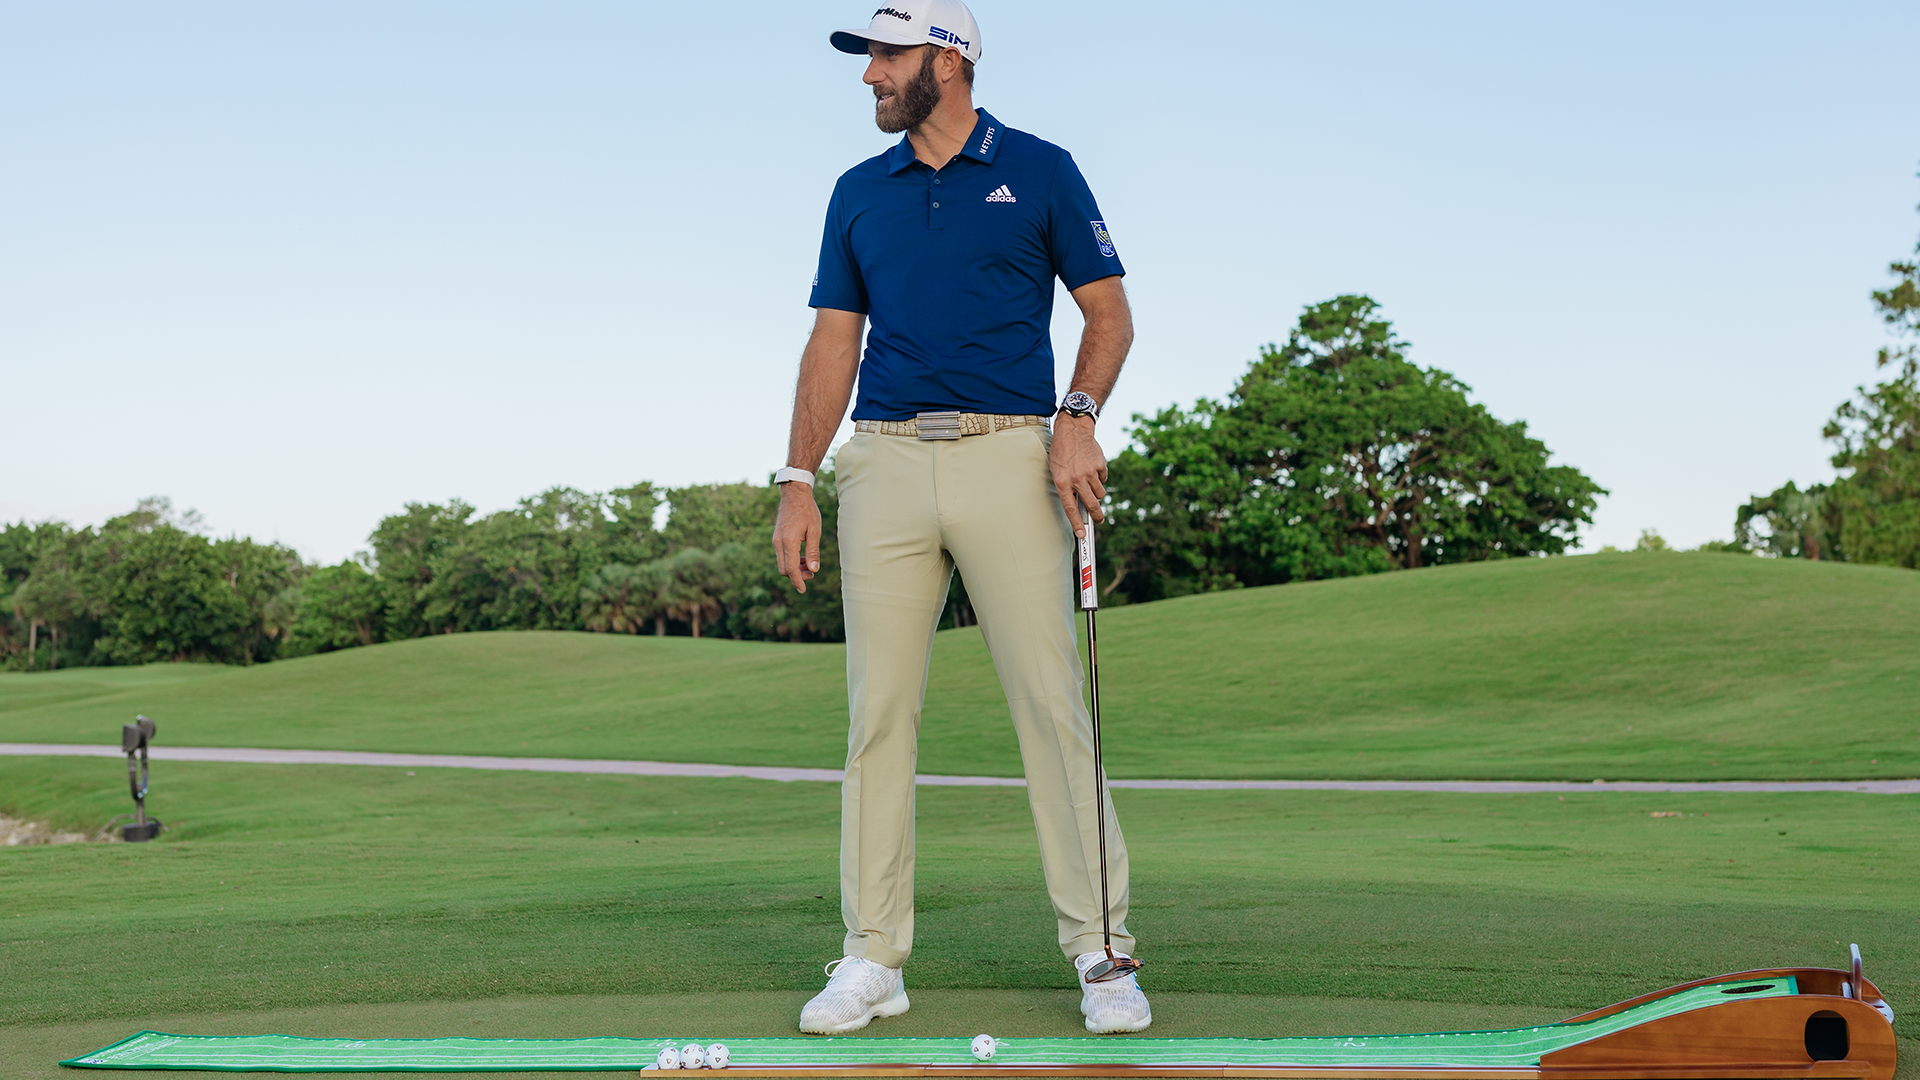 Dustin Johnson on golf course using Perfect Practice putting mat